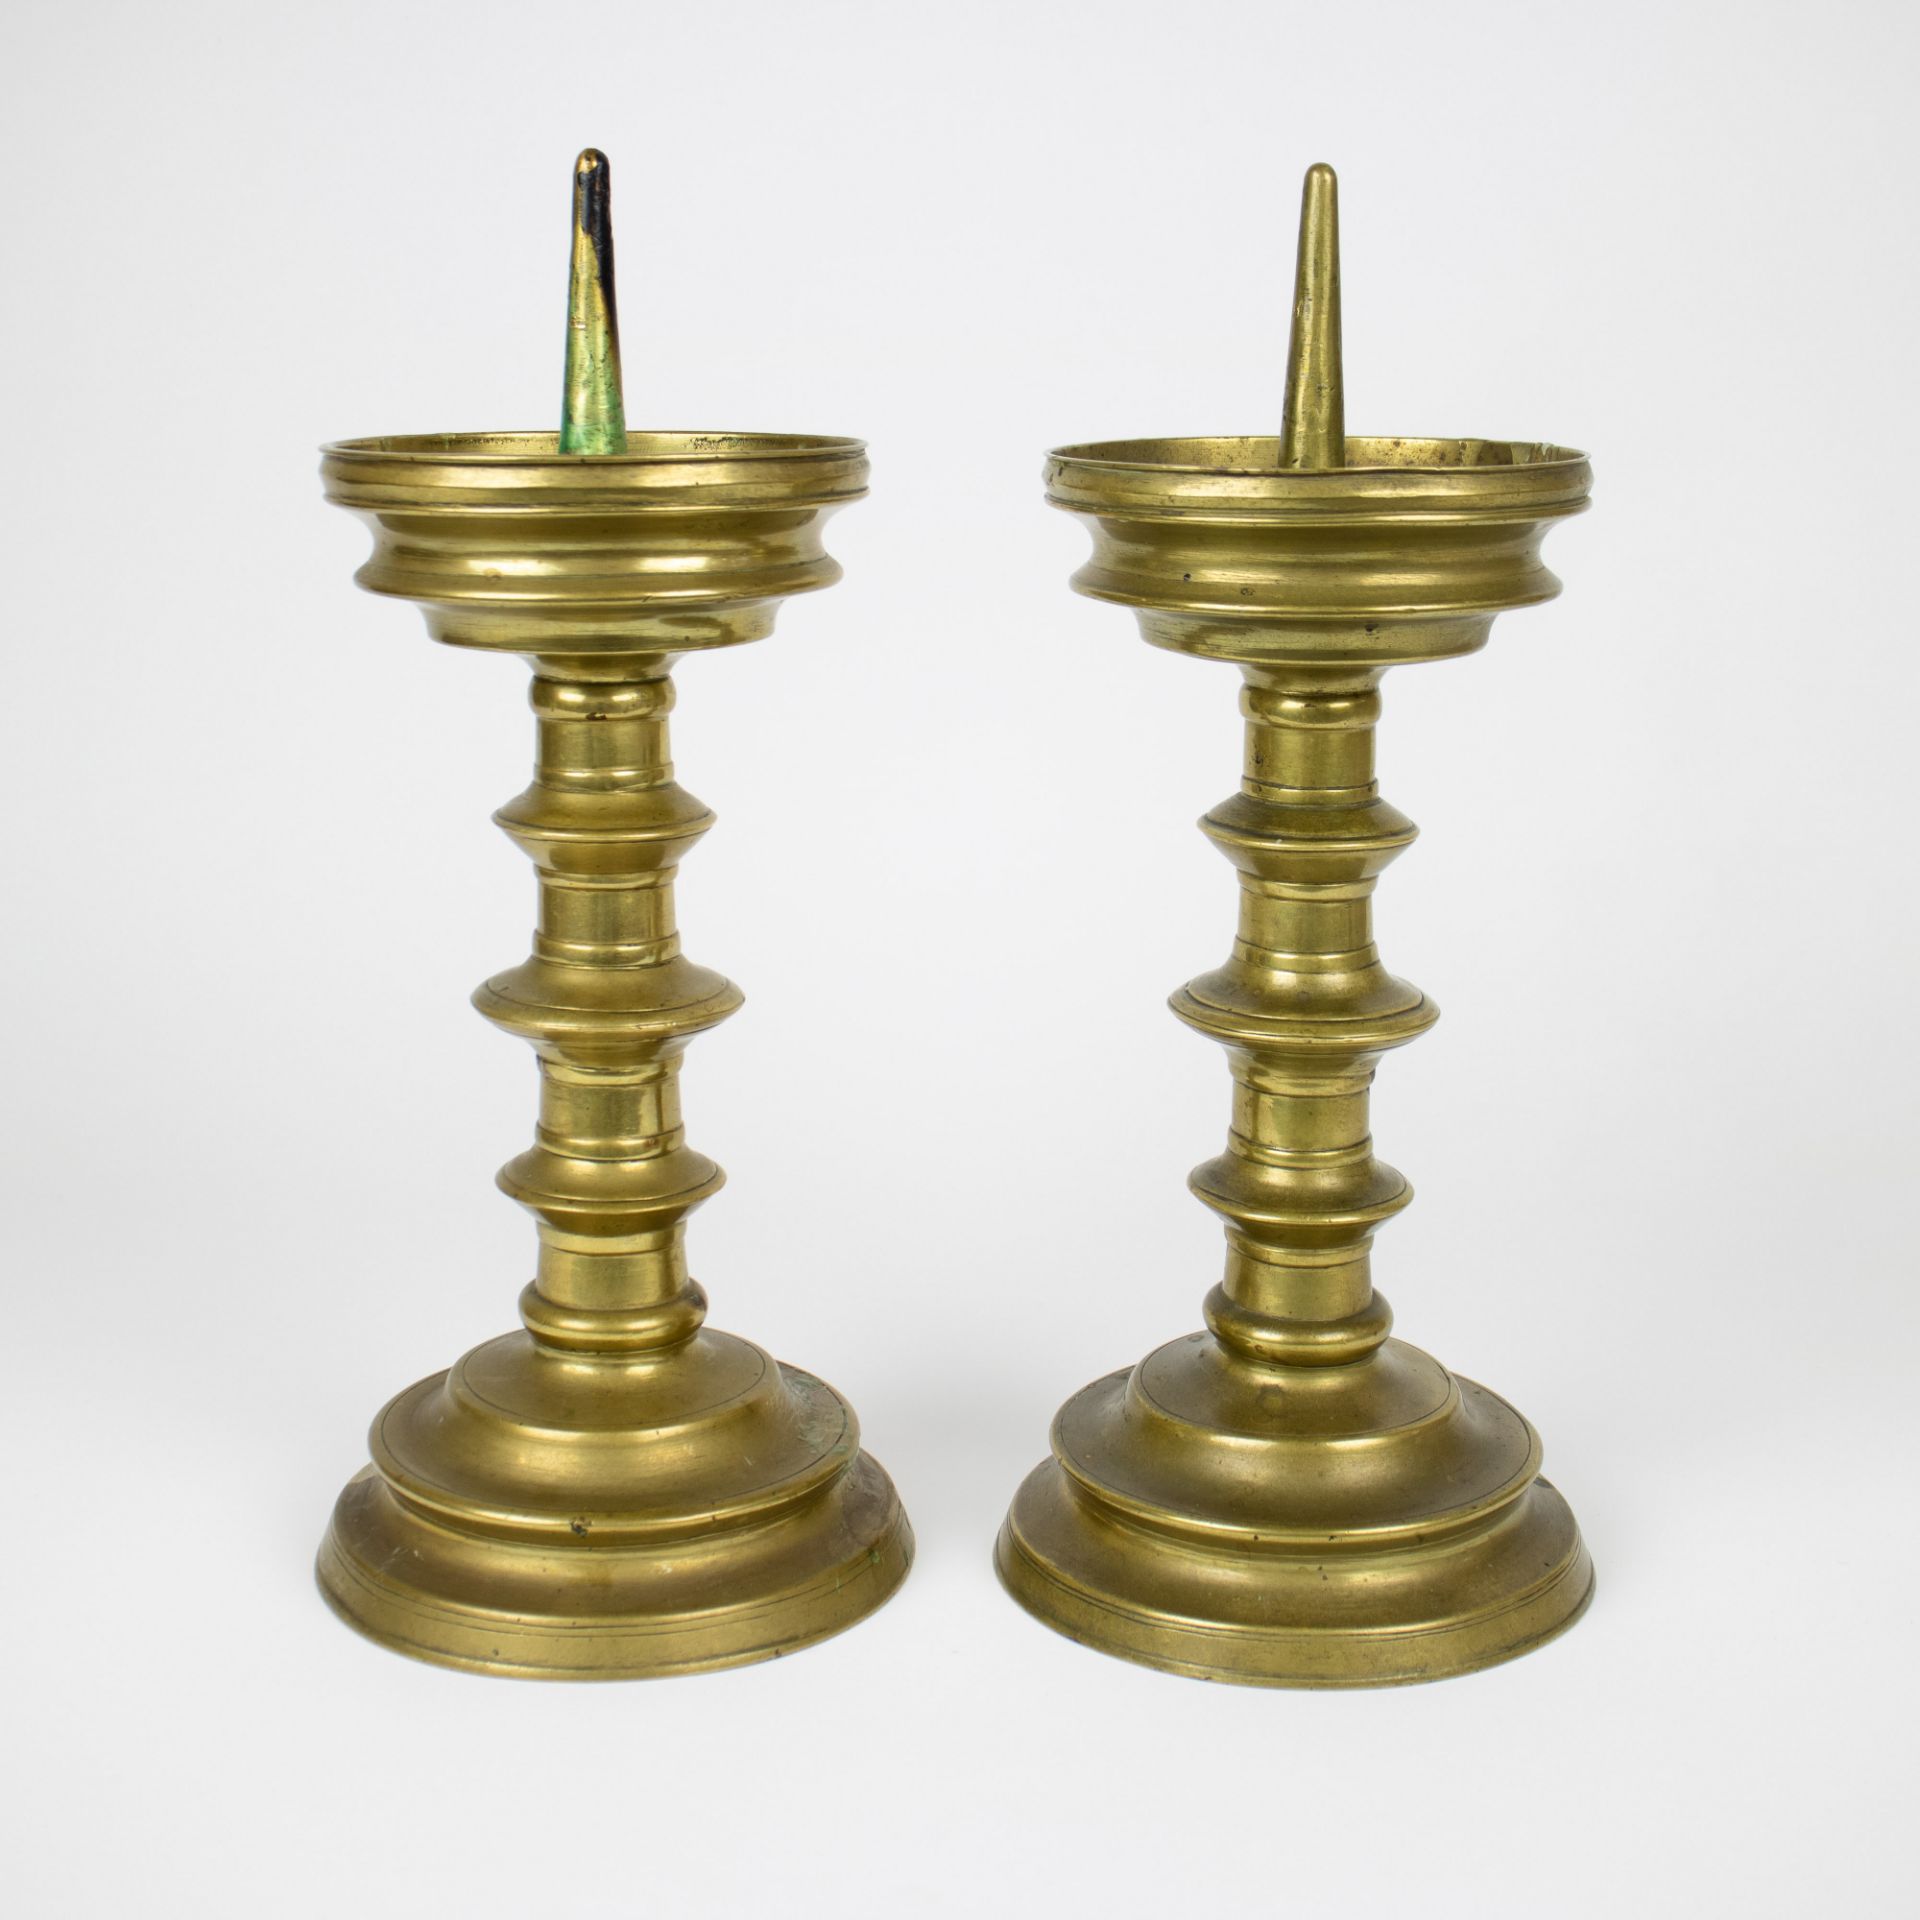 A pair of 19th century candlesticks - Image 3 of 6